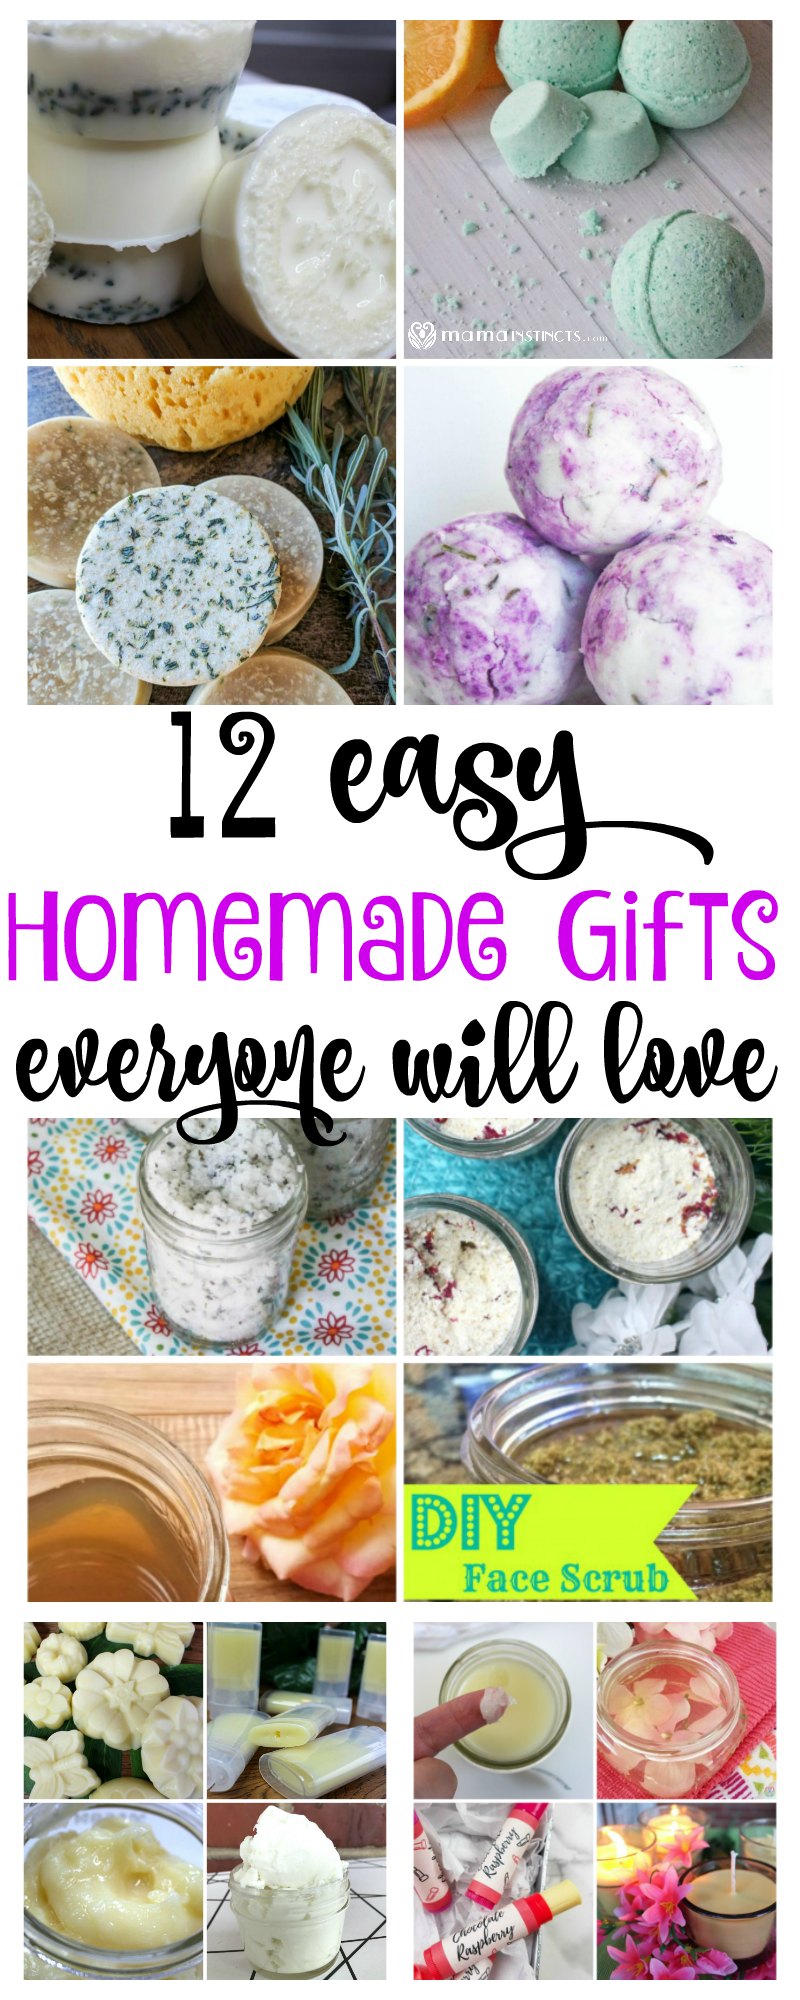 Looking for a homemade gift everyone will love? Try one or two of these recipes. They're easy to make and the products turn out great! #DIYbeauty #homemadegifts